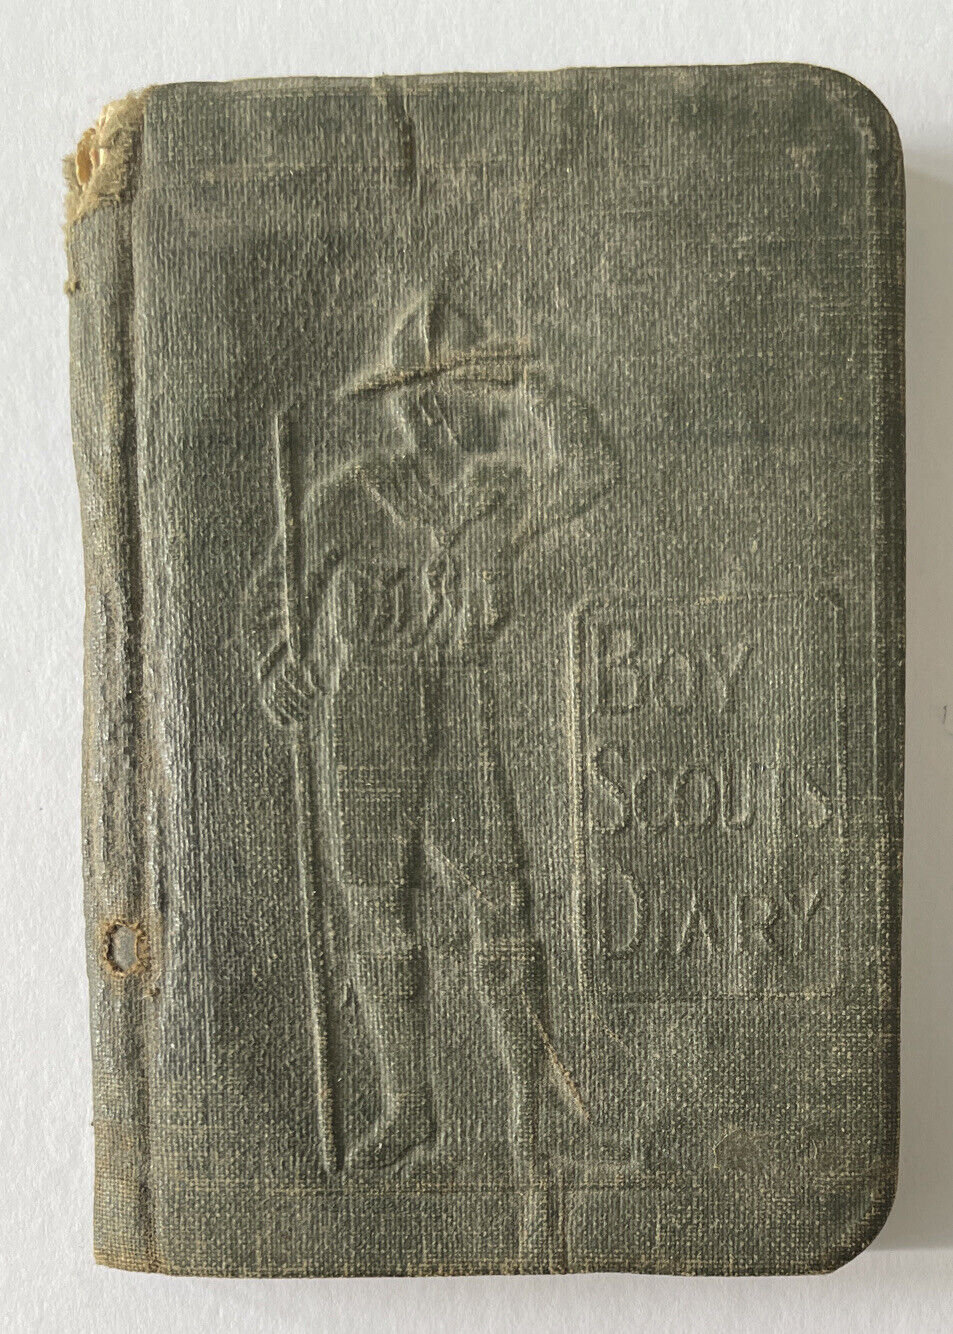 Boy Scouts Diary, 1945. Published By Charles Letts